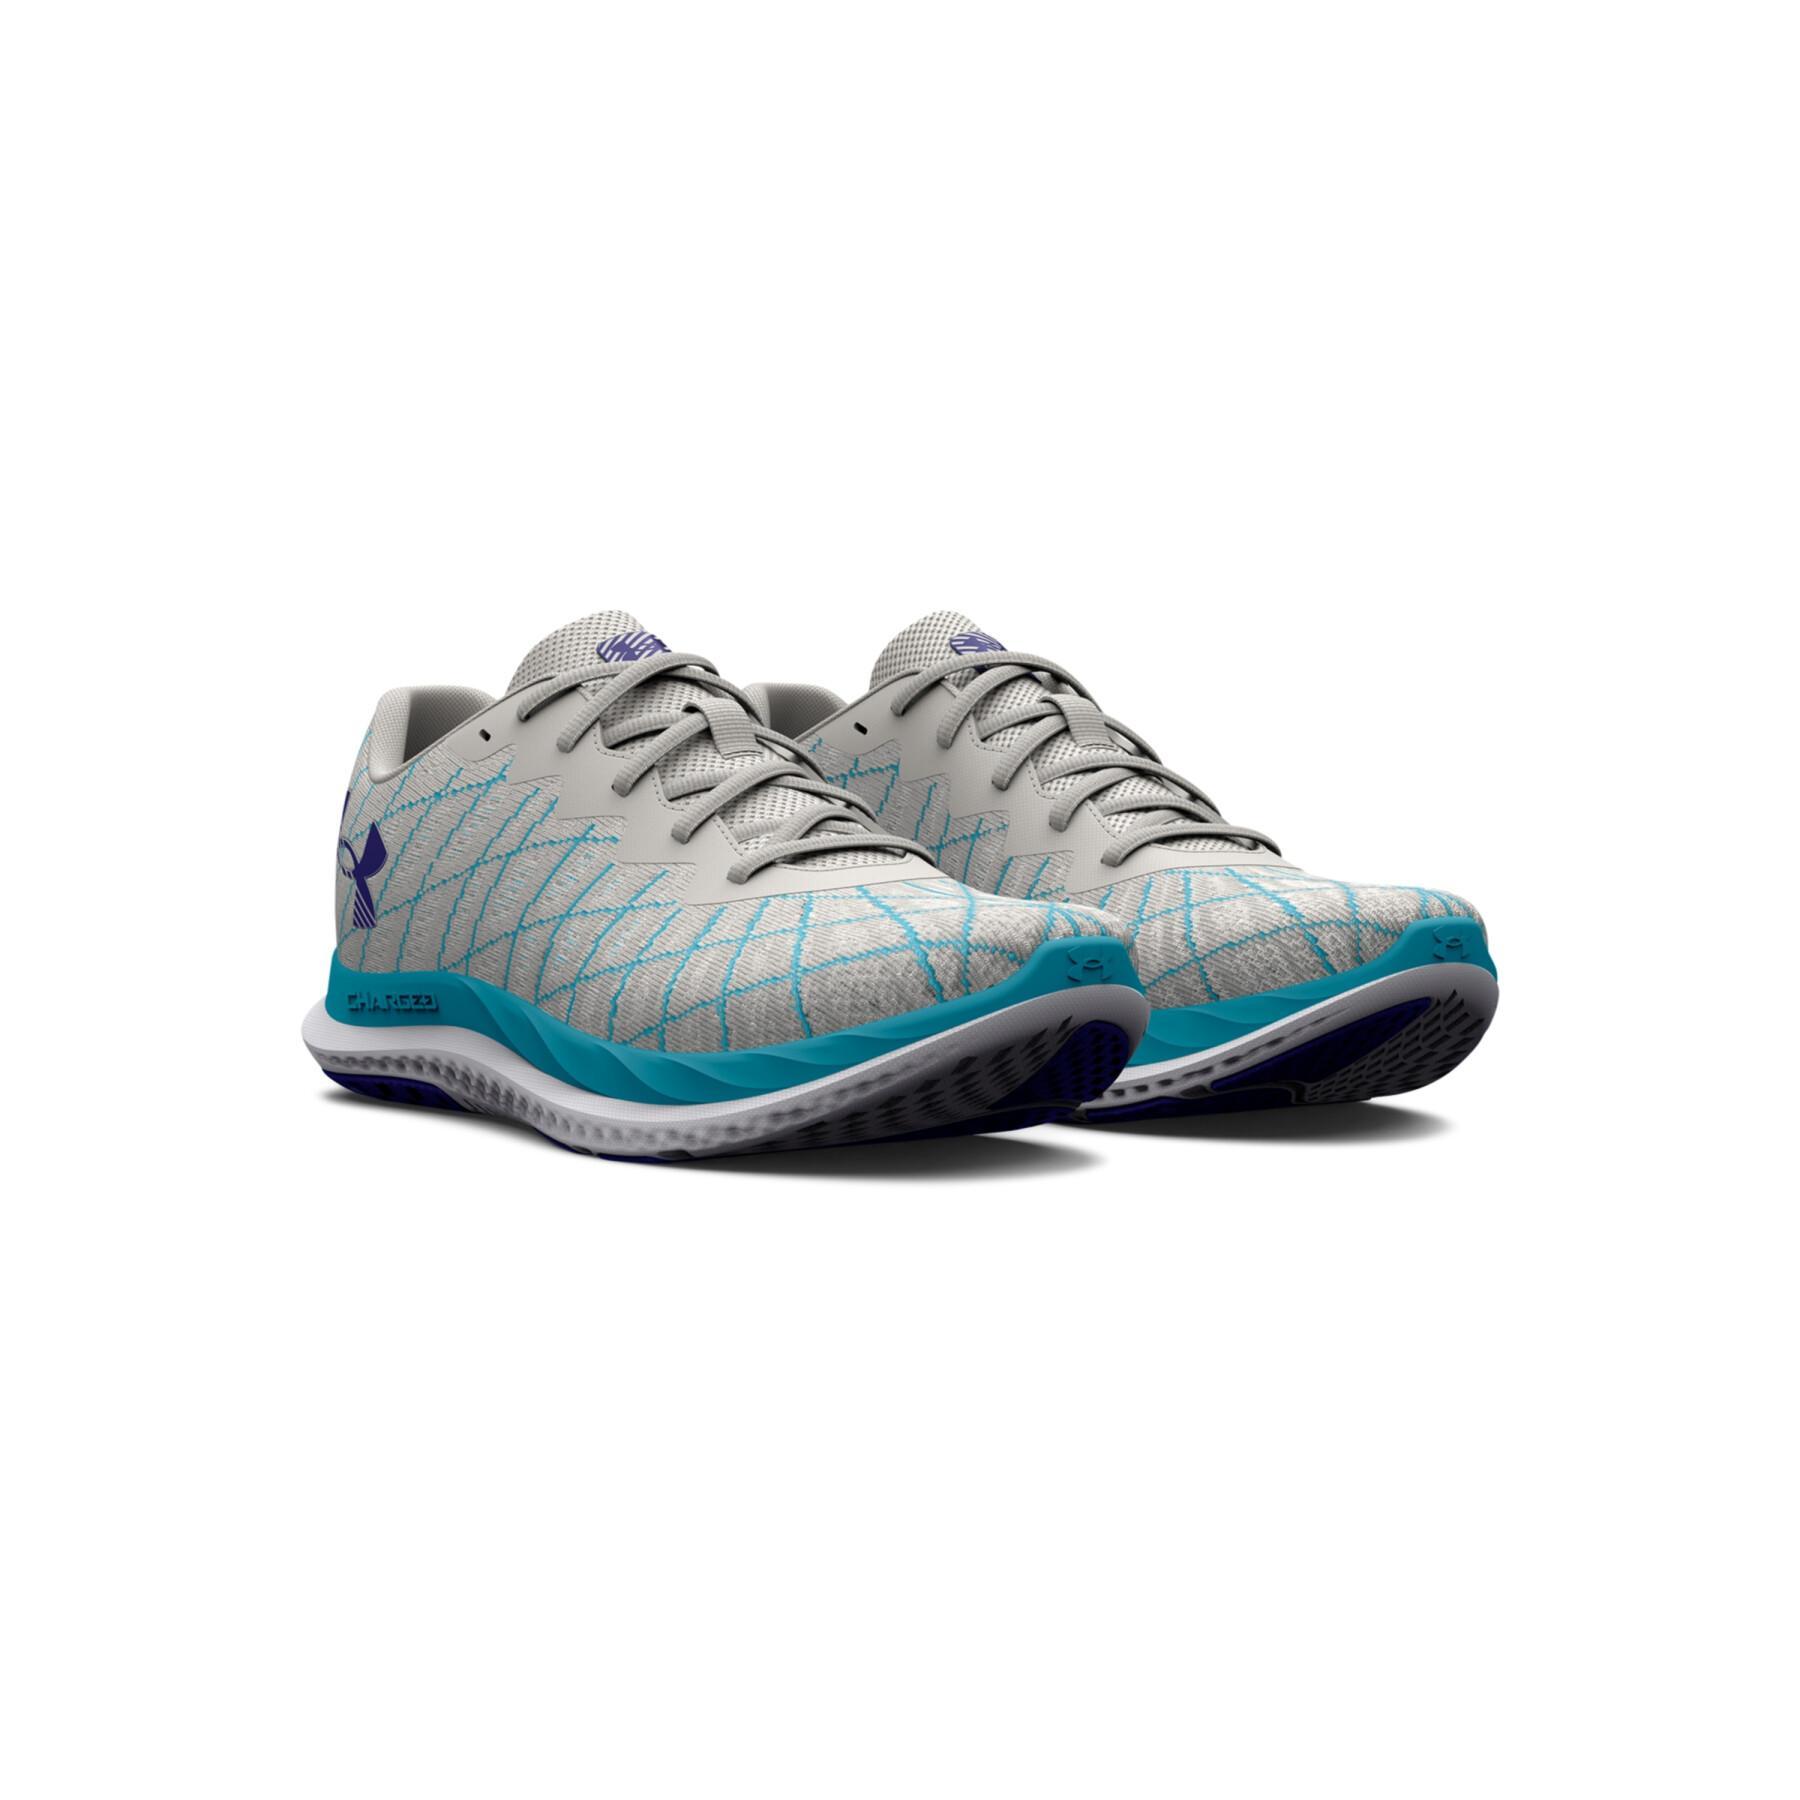 Zapatillas de running mujer Under Armour Charged Breeze 2